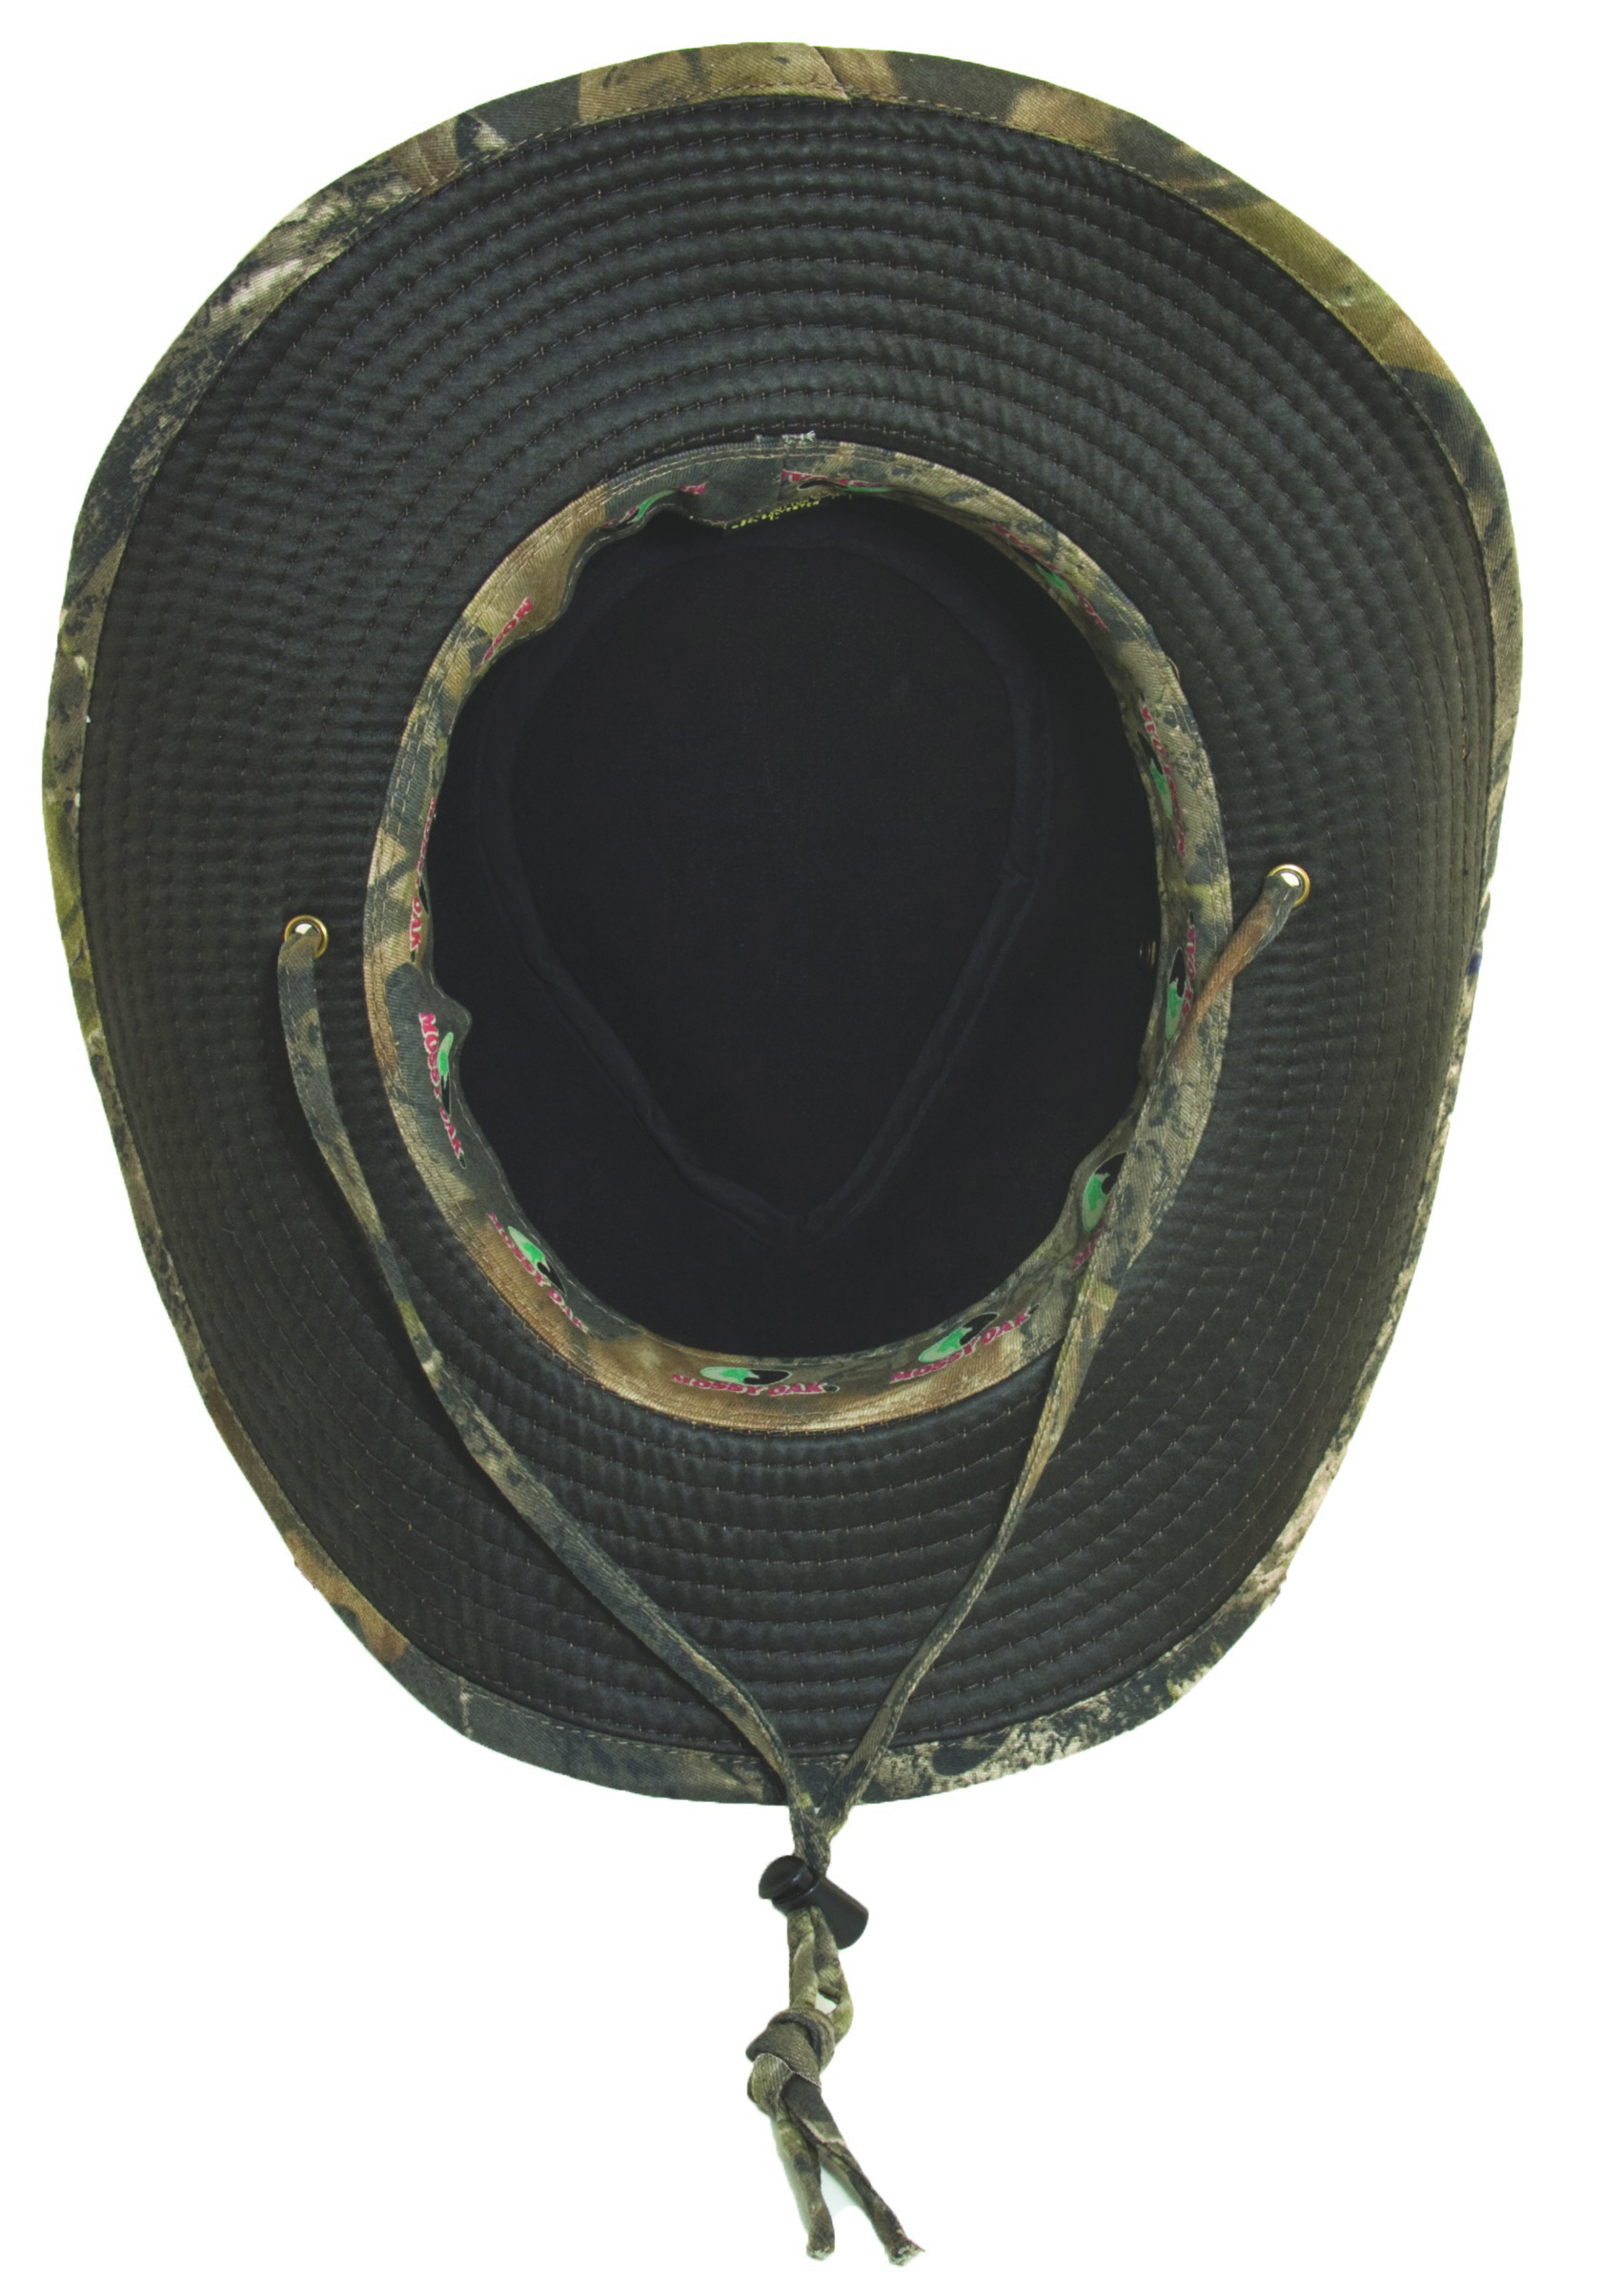 Hawx Men's Black Outback Weathered Cotton Sun Work Hat